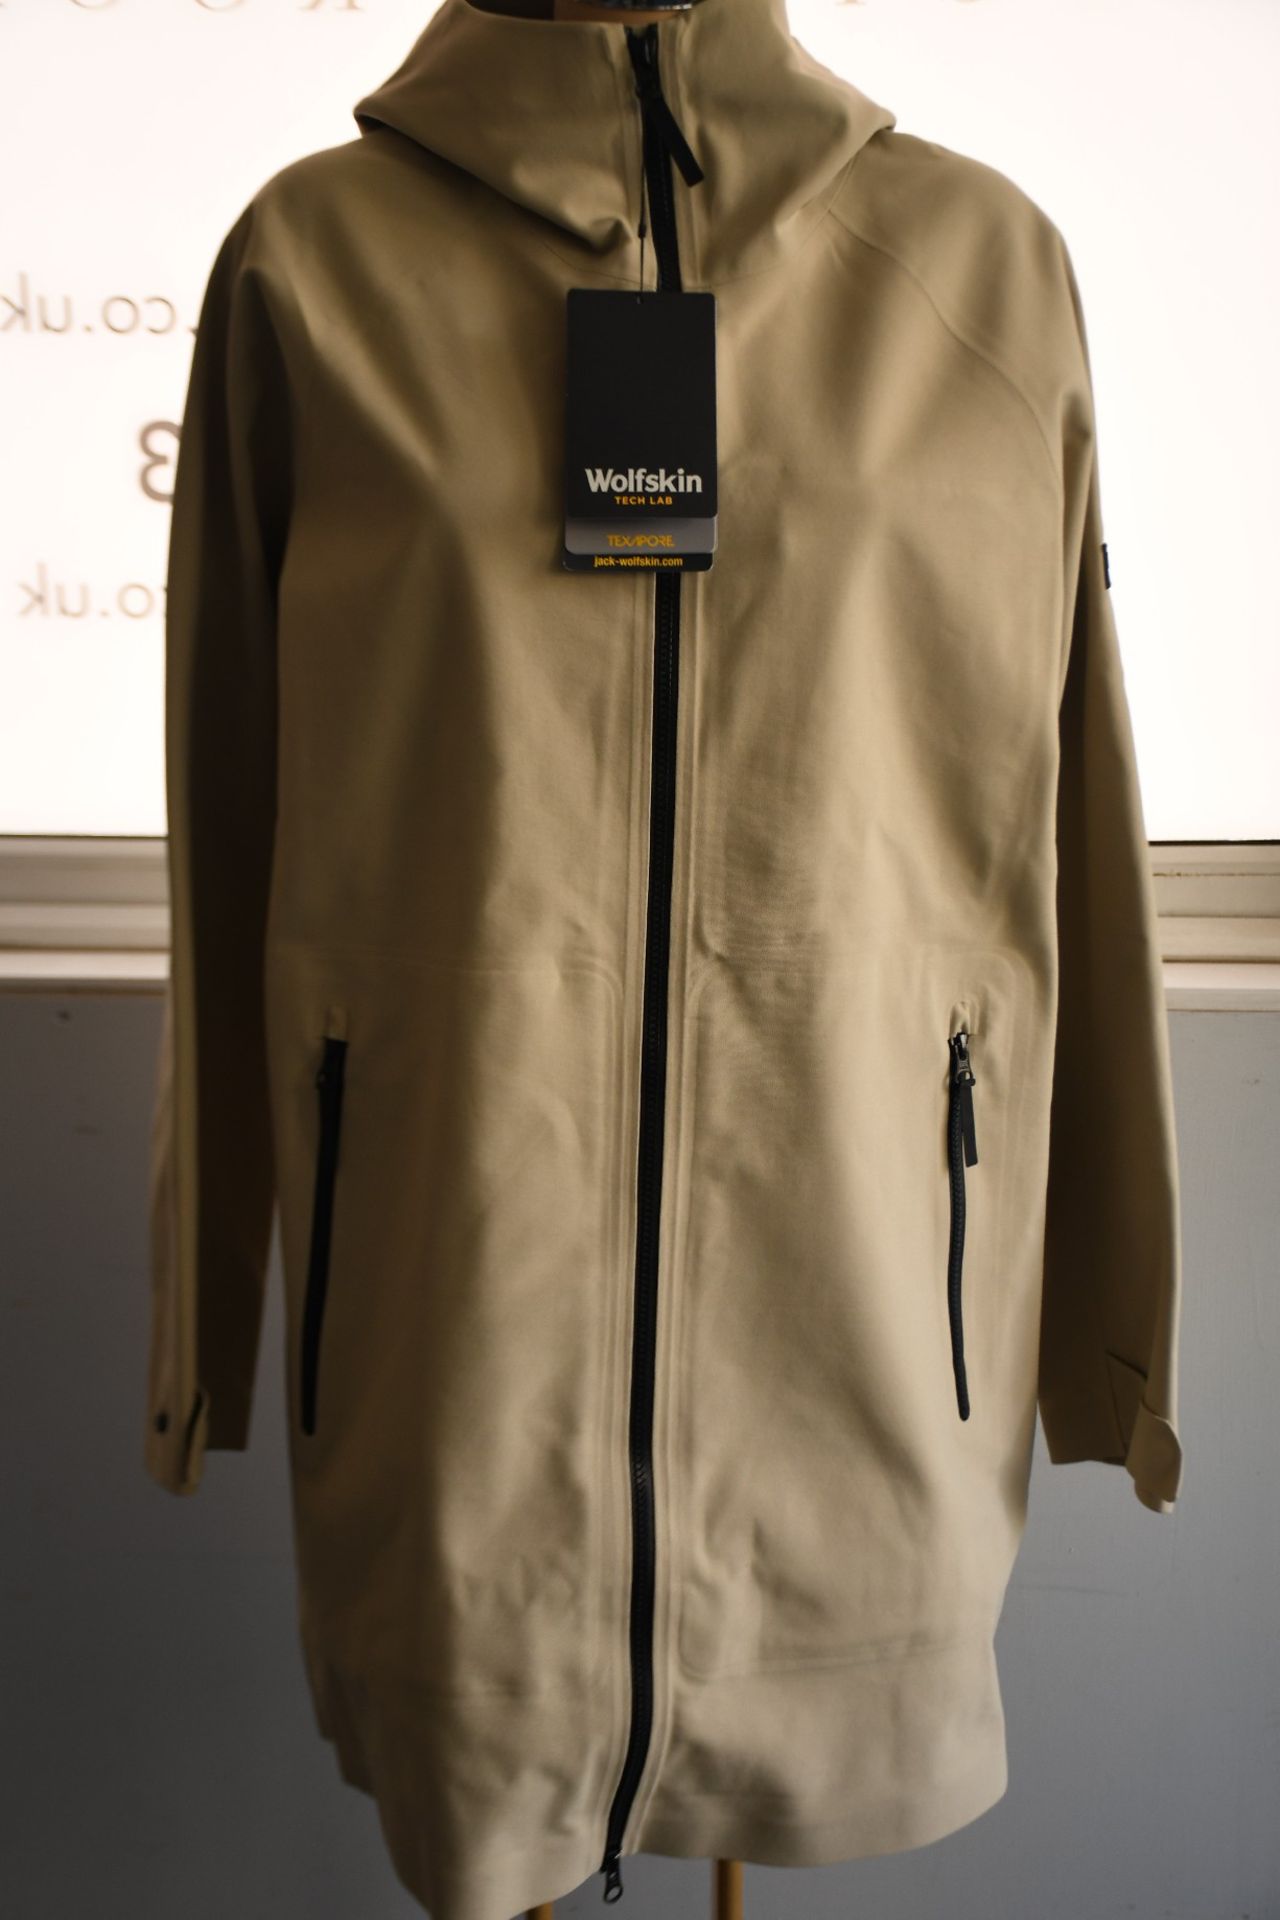 An as new Jack Wolfskin The Storm Shell jacket in almond (M).